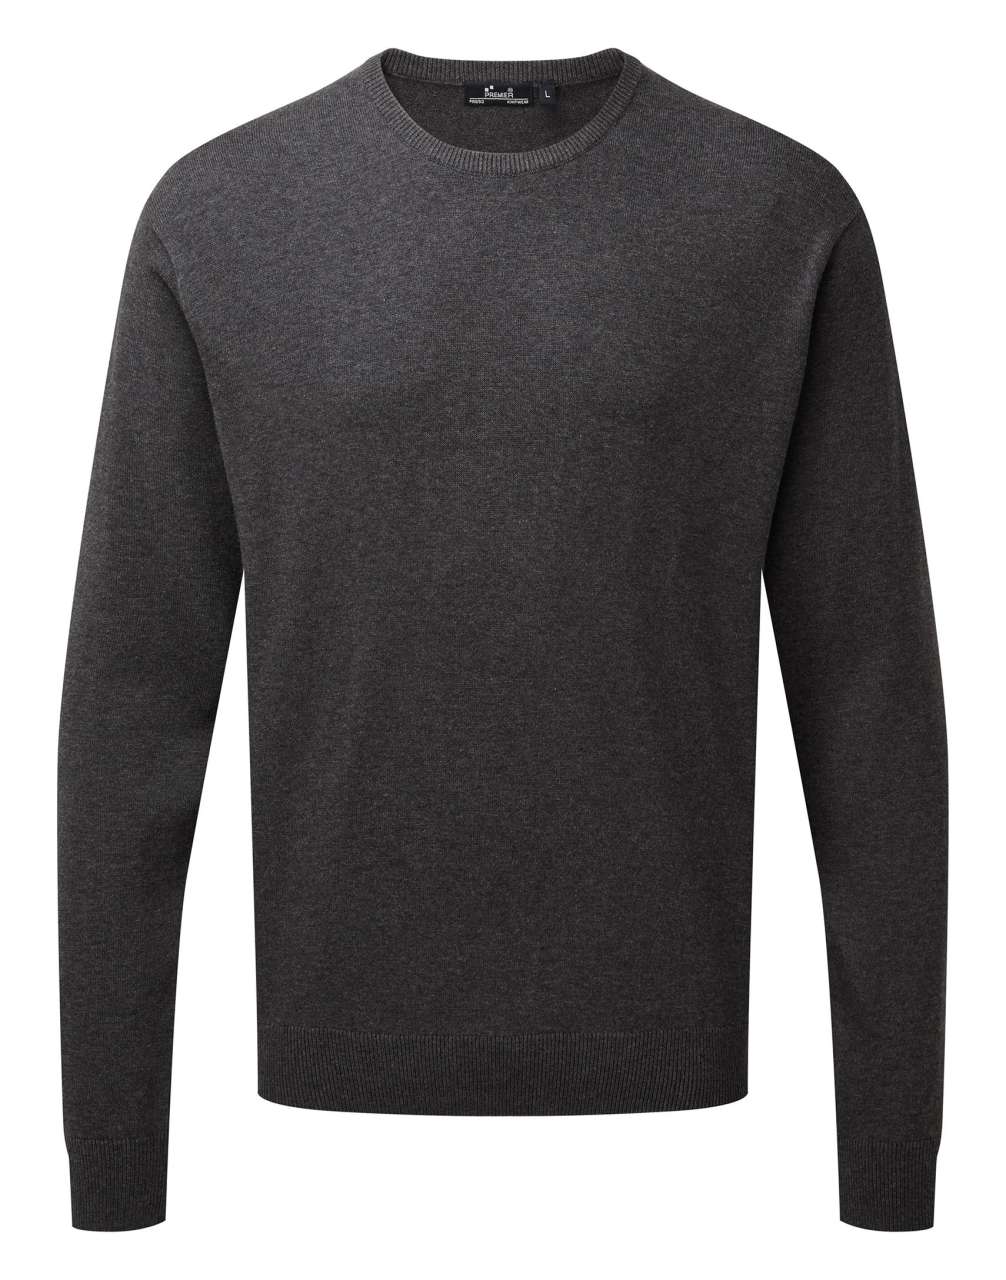 MEN'S CREW NECK COTTON RICH KNITTED SWEATER s logom 